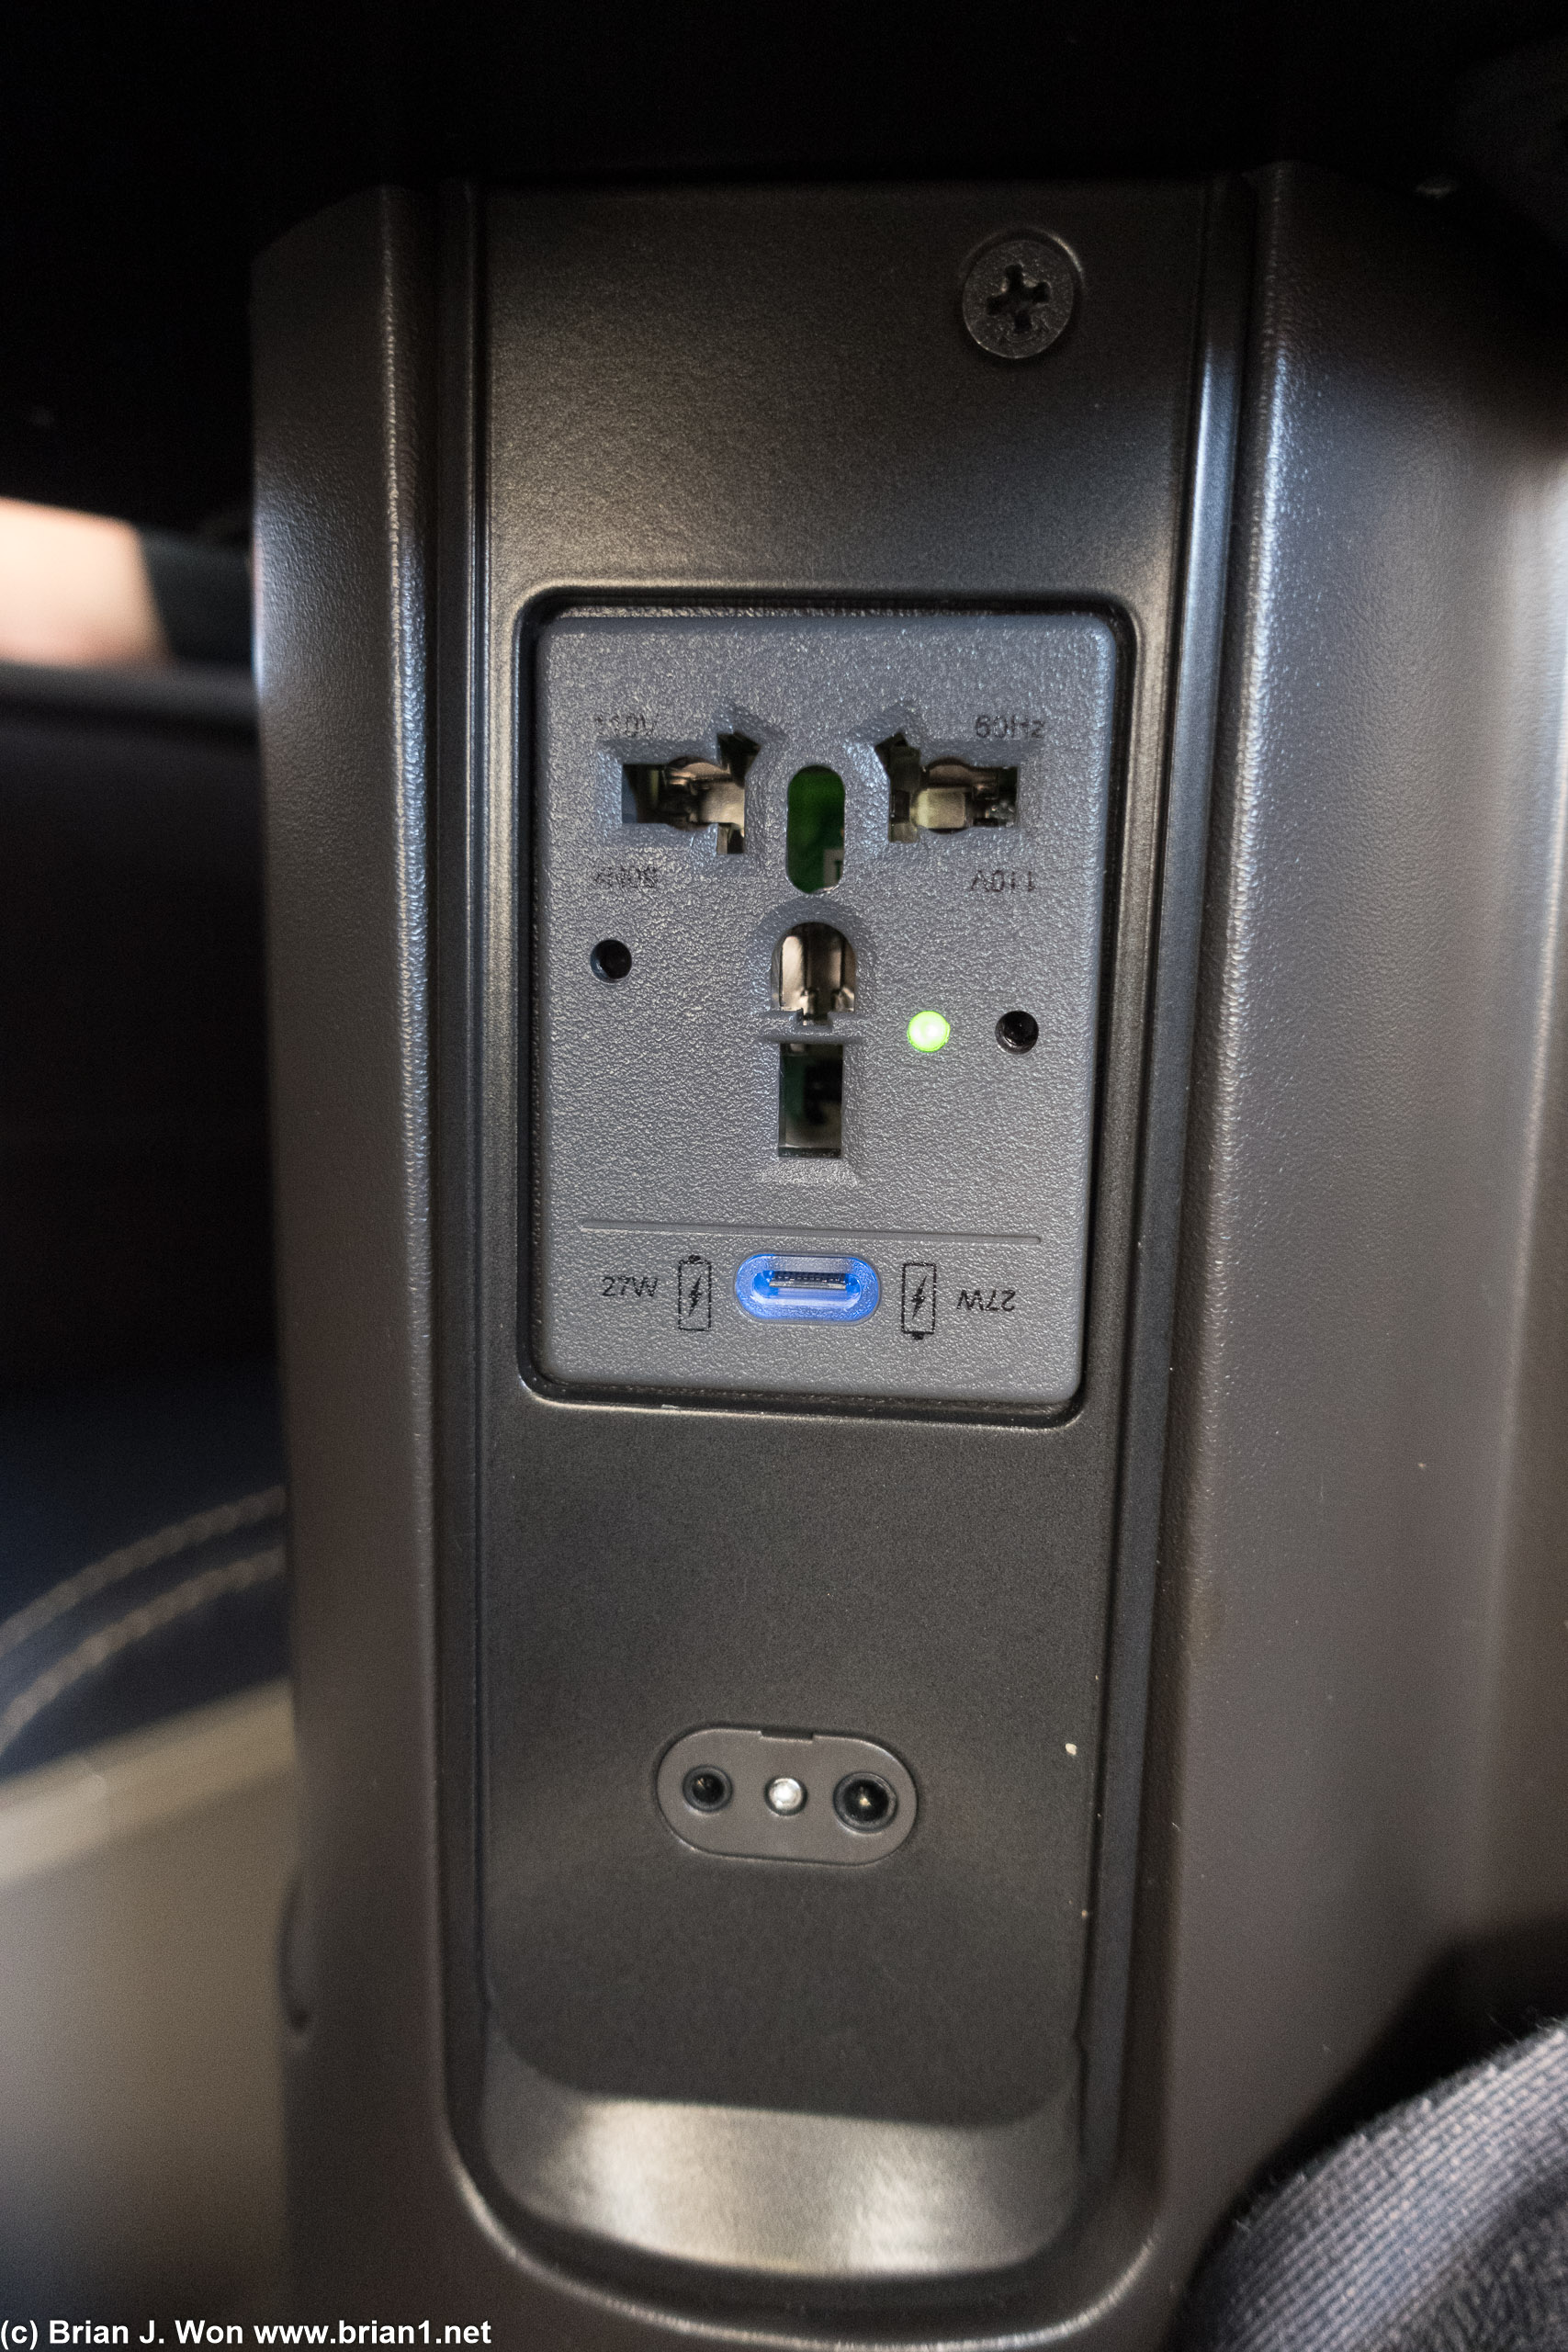 27 watt USB-C power outlets have arrived on United! Wish they were 45W but can't be greedy.